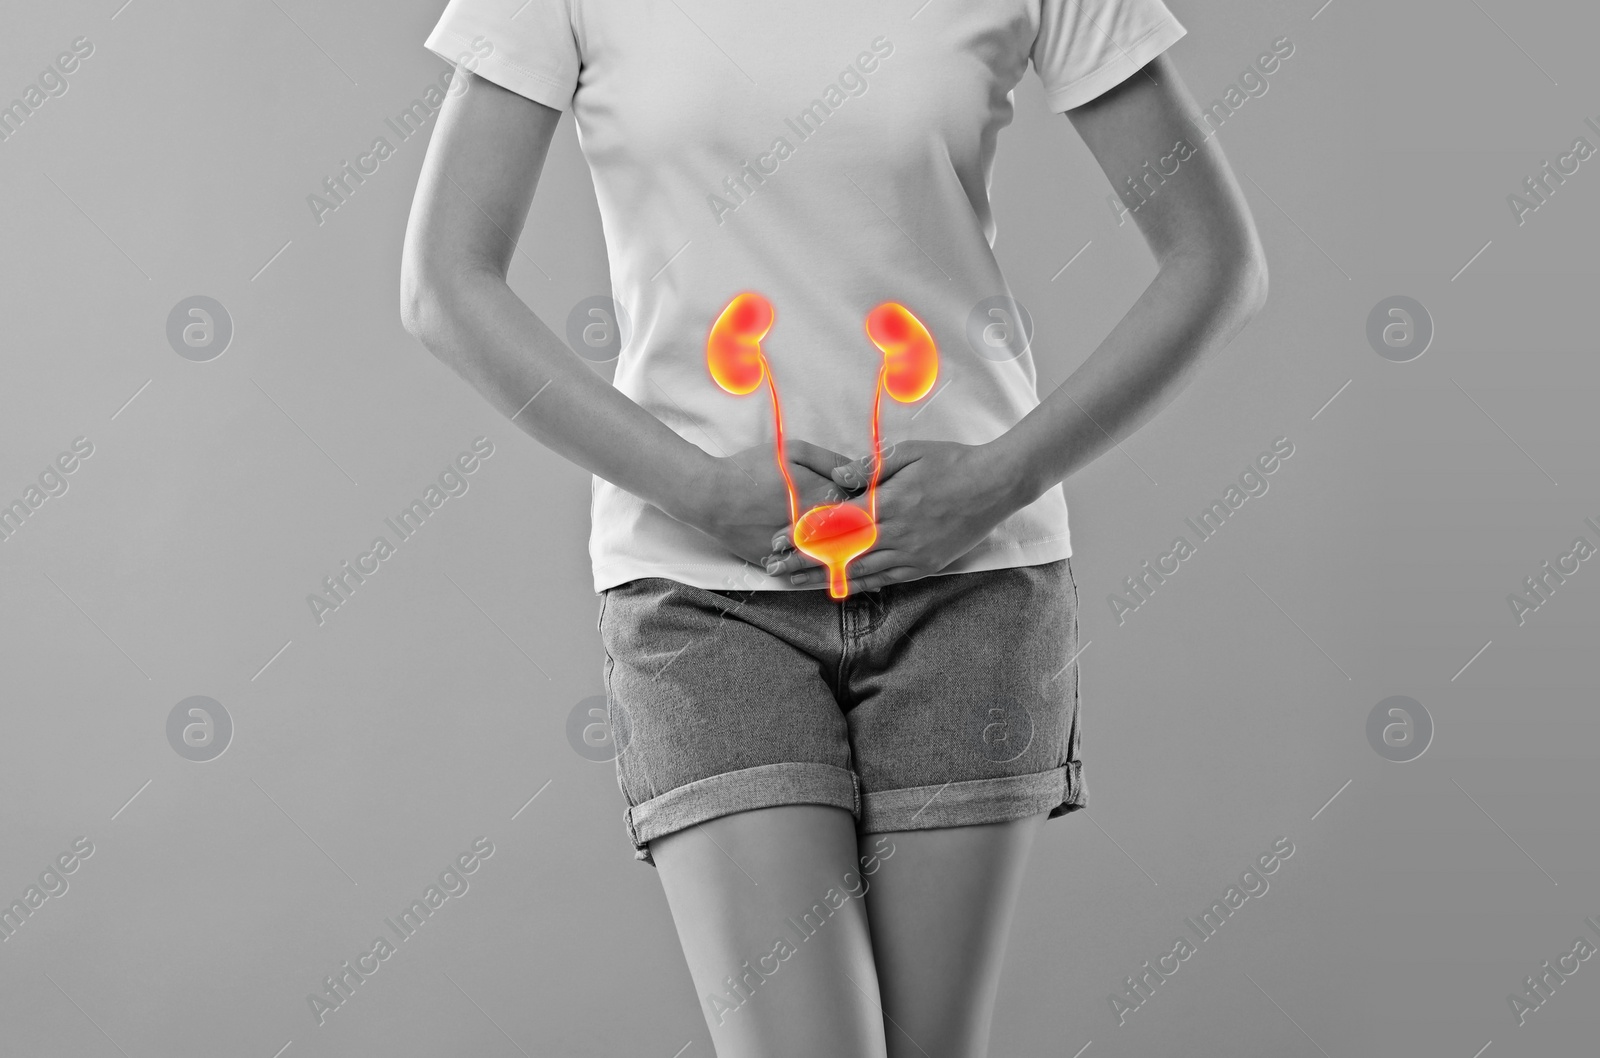 Image of Woman suffering from cystitis on light grey background, closeup. Illustration of urinary system